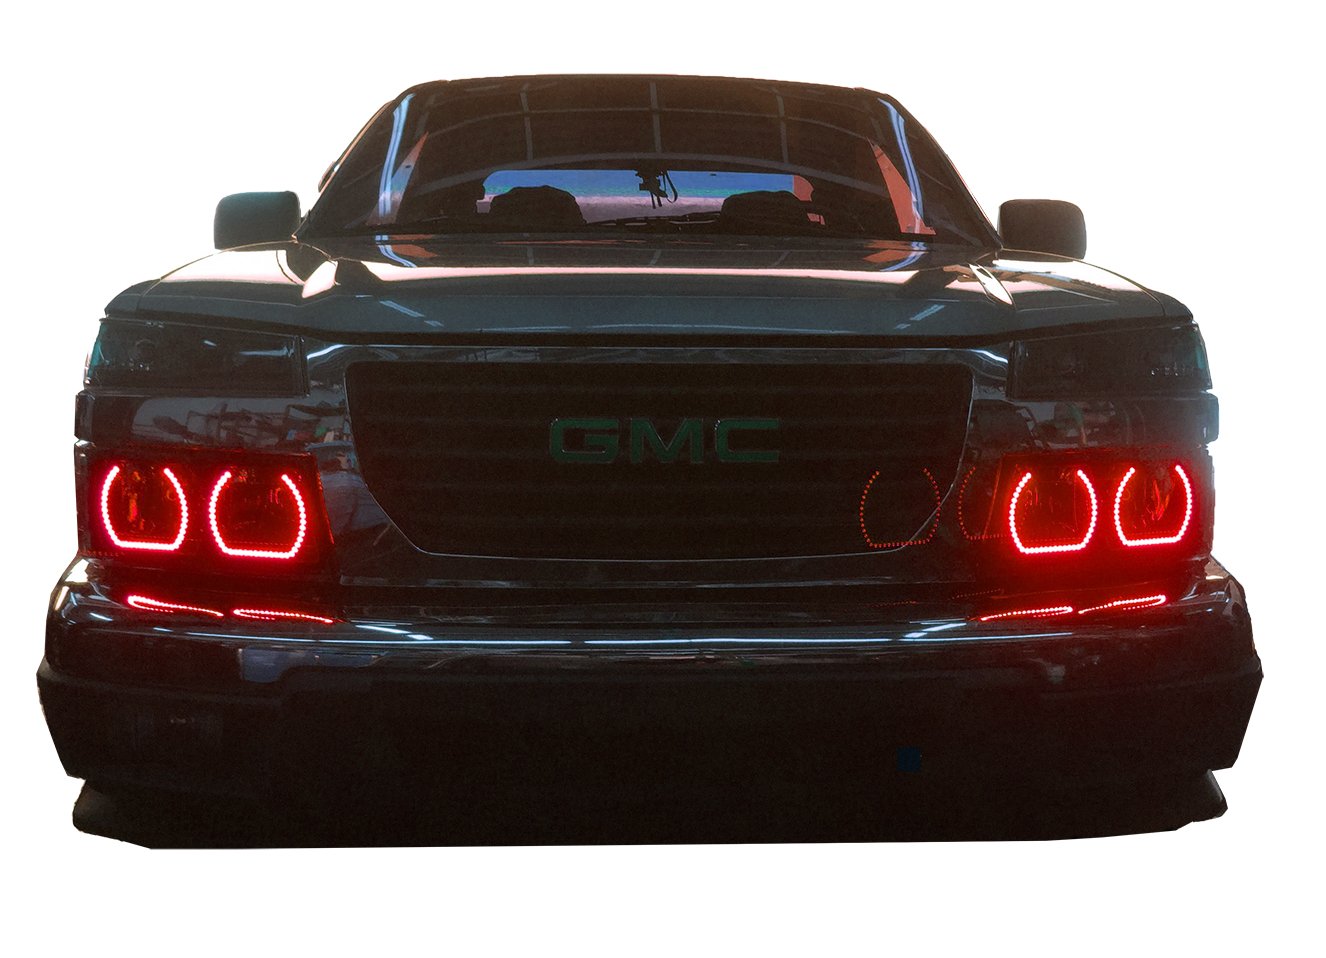 GMC-Canyon-2004, 2005, 2006, 2007, 2008, 2009, 2010, 2011, 2012-LED-Halo-Headlights-ColorChase-No Remote-GMC-CN0412-CCH